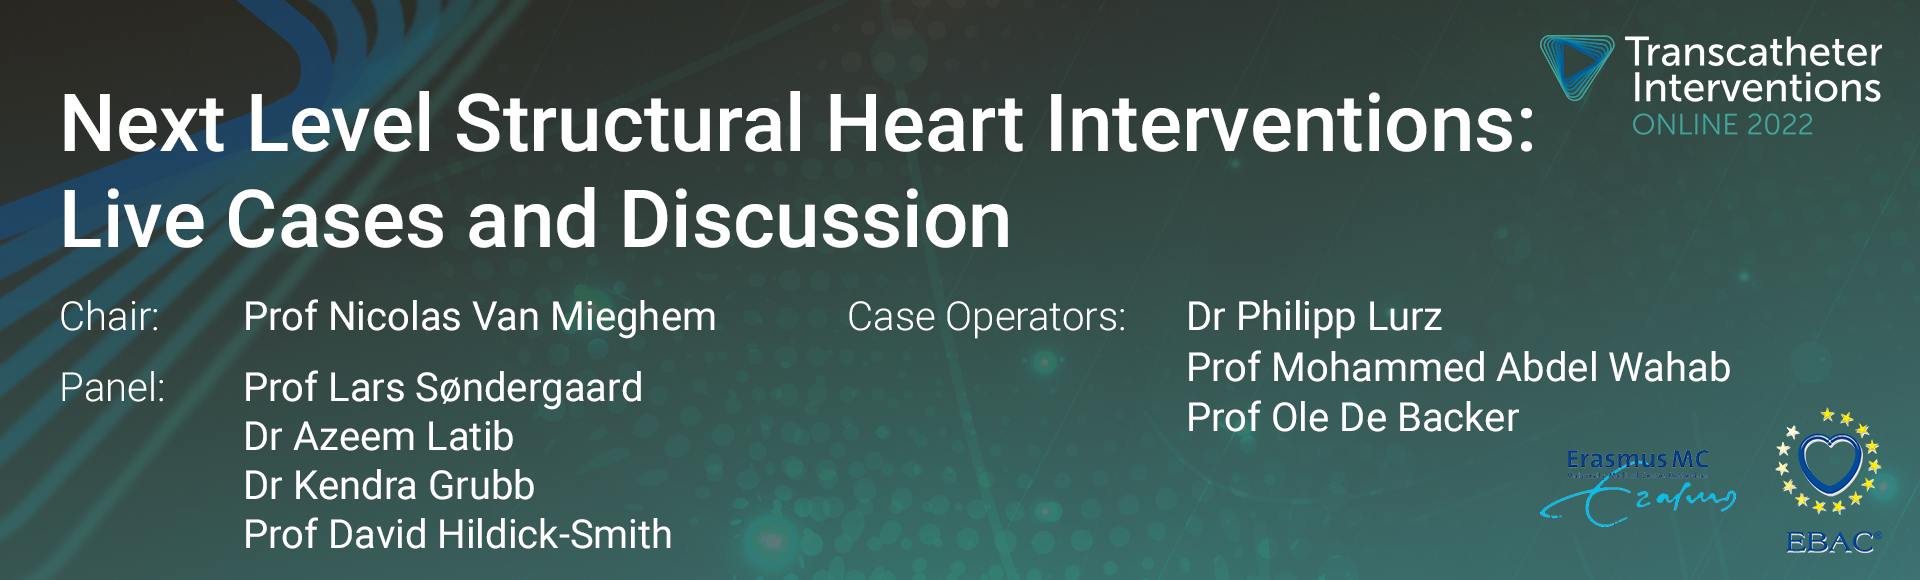 TIO 2022 - Session 1.2 Next Level Structural Heart Interventions: Live Cases and Discussion